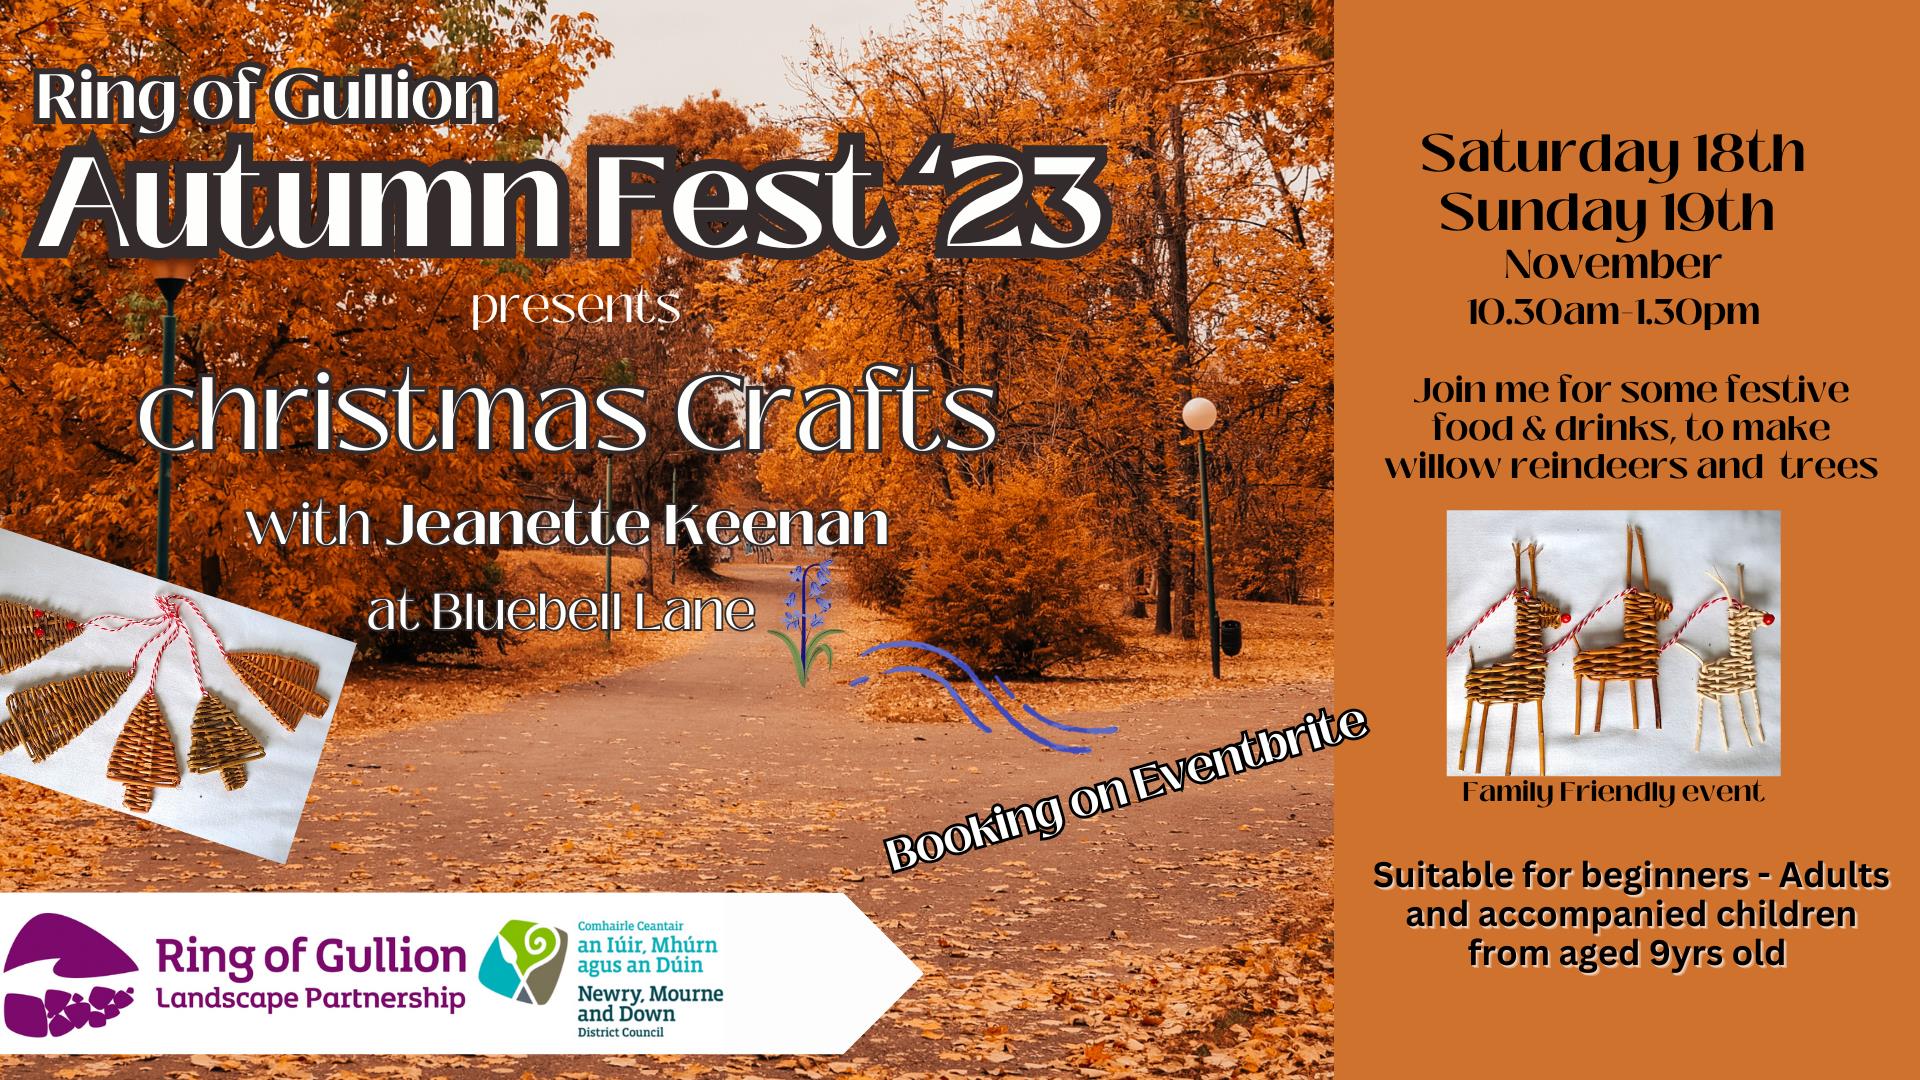 Ring of Gullion Autumn Fest23 - Willow weaving Christmas Crafts